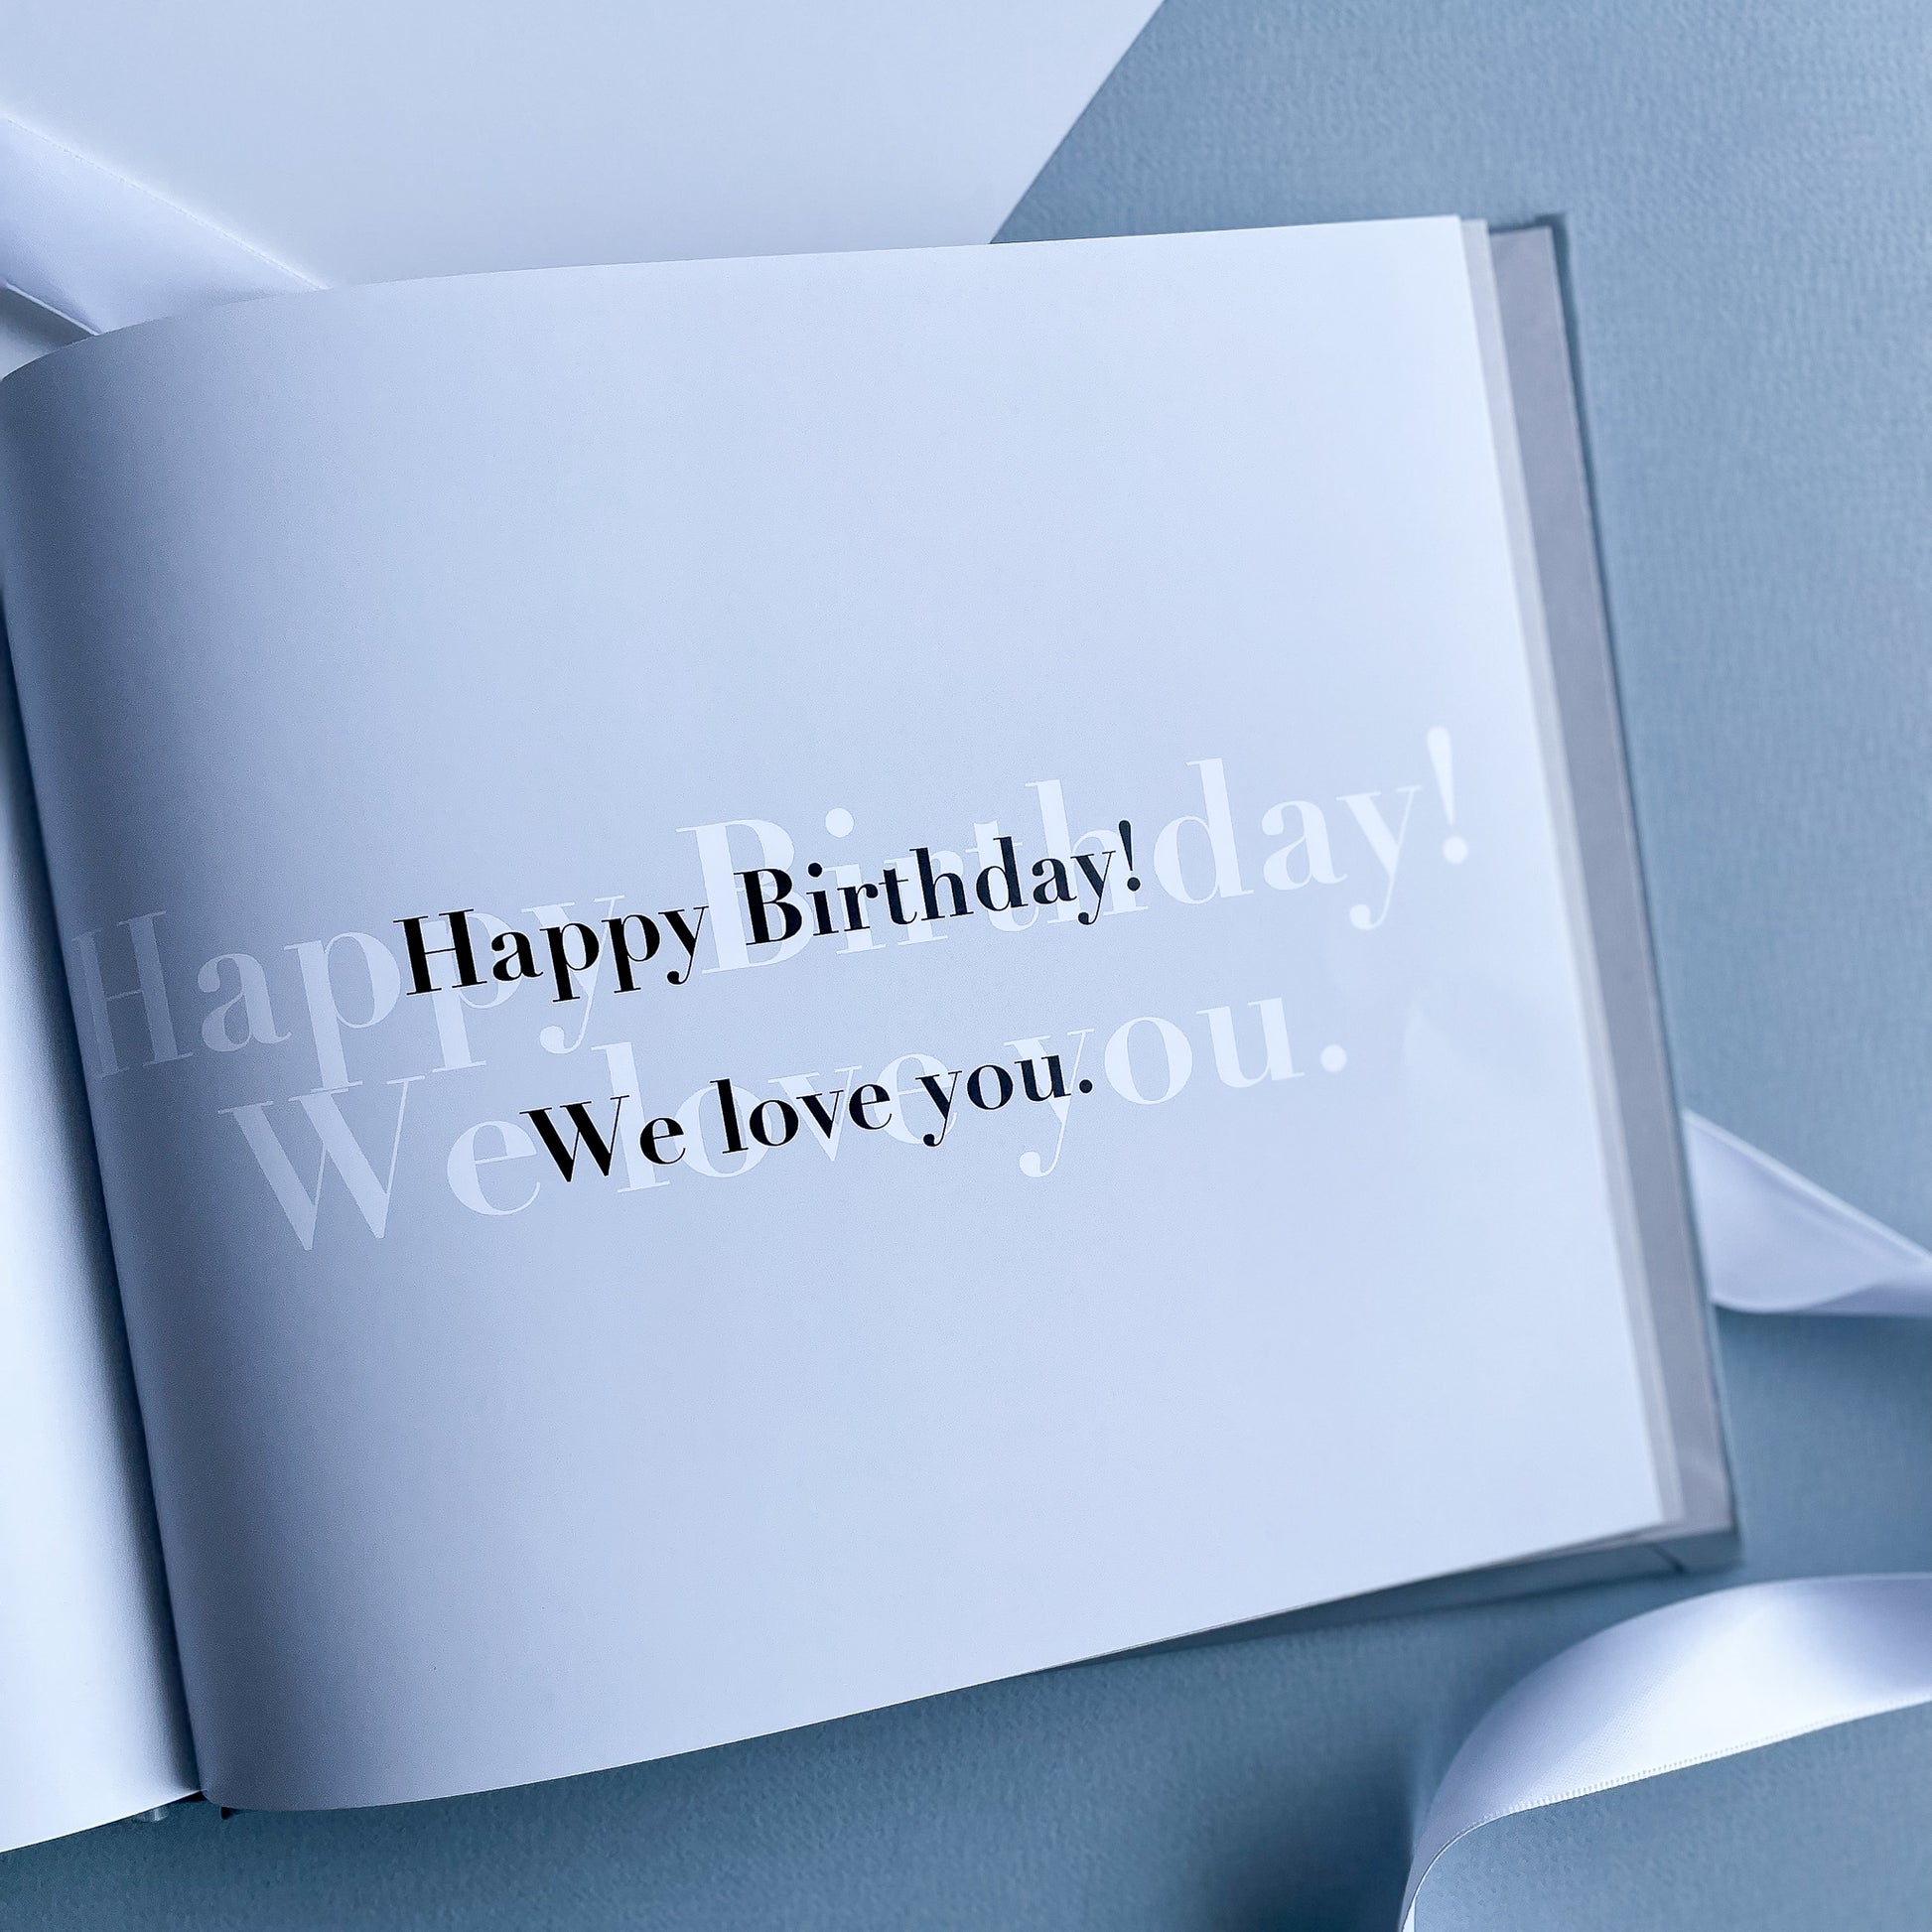 The Birthday Book - Collaborative book by family and friends – prompt'd